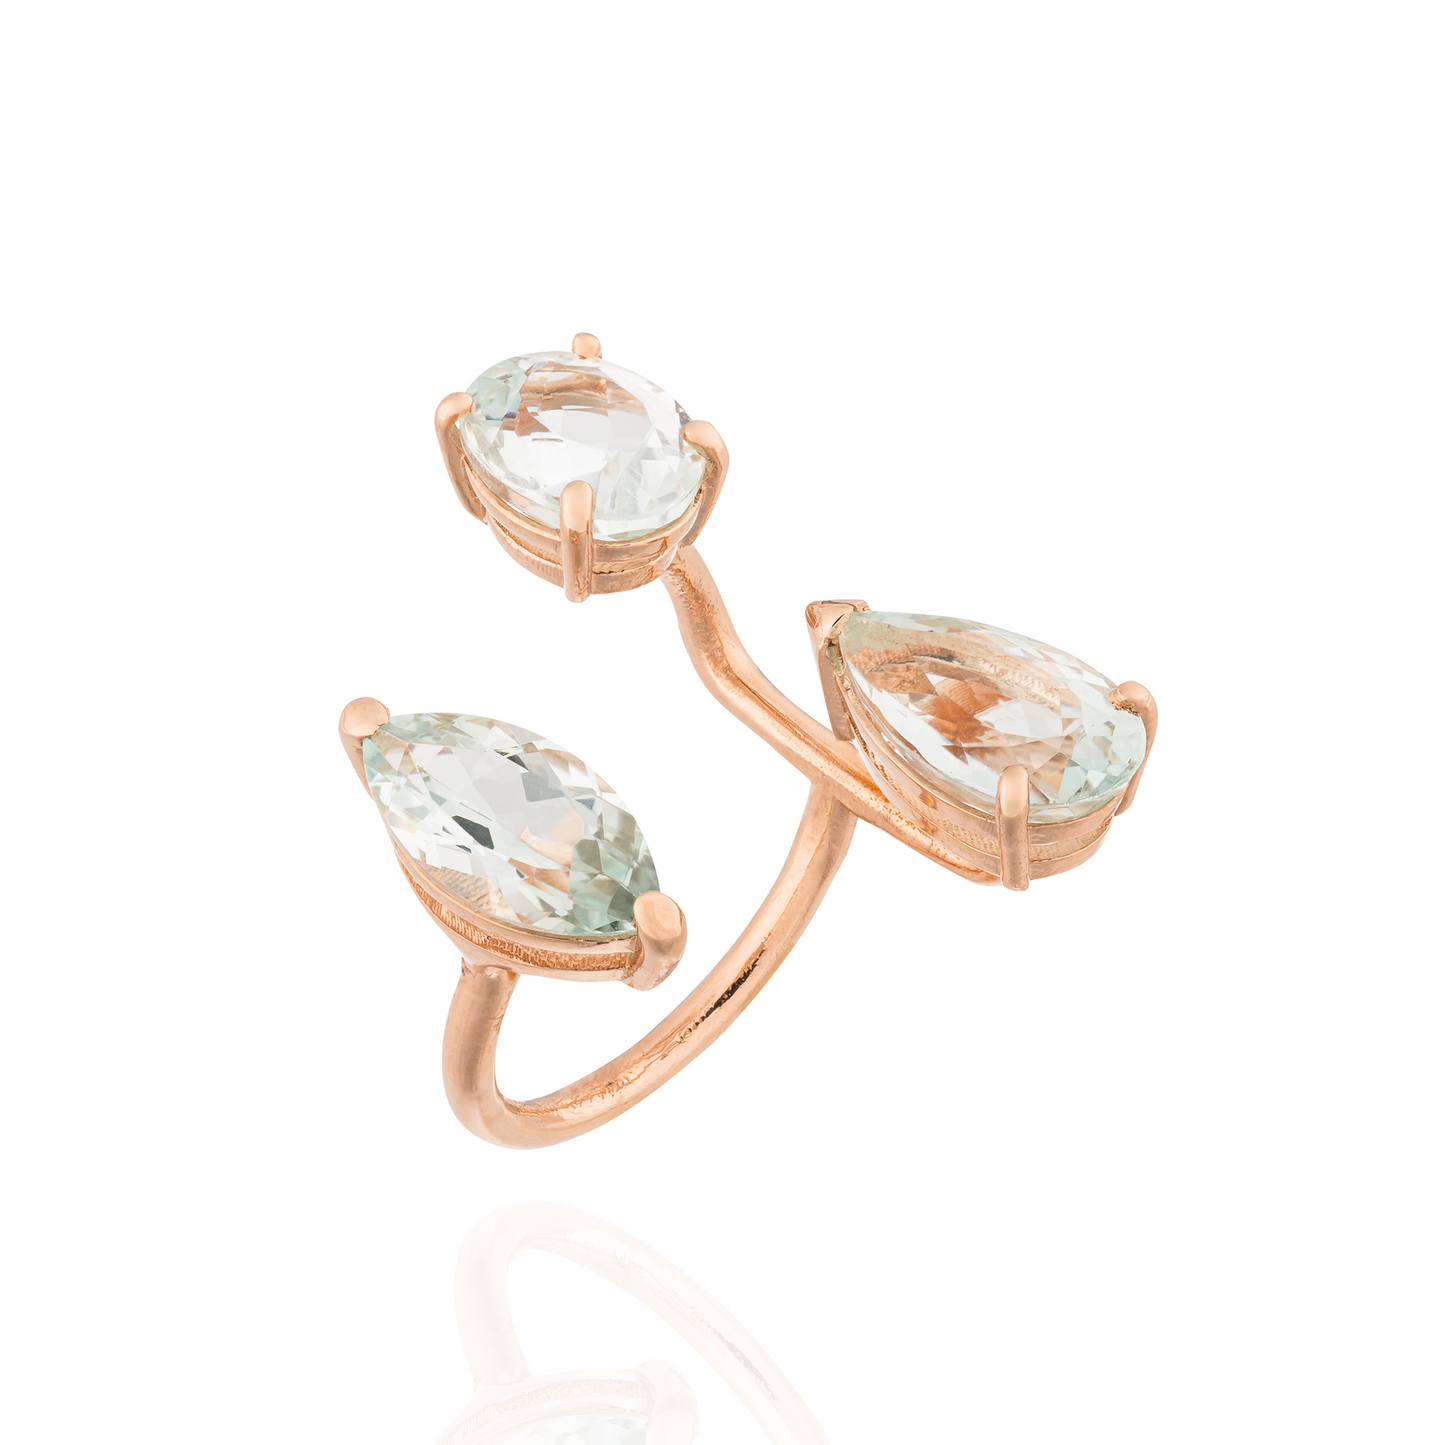 14KT Rose Gold Ring with Oval Faceted Aquamarines